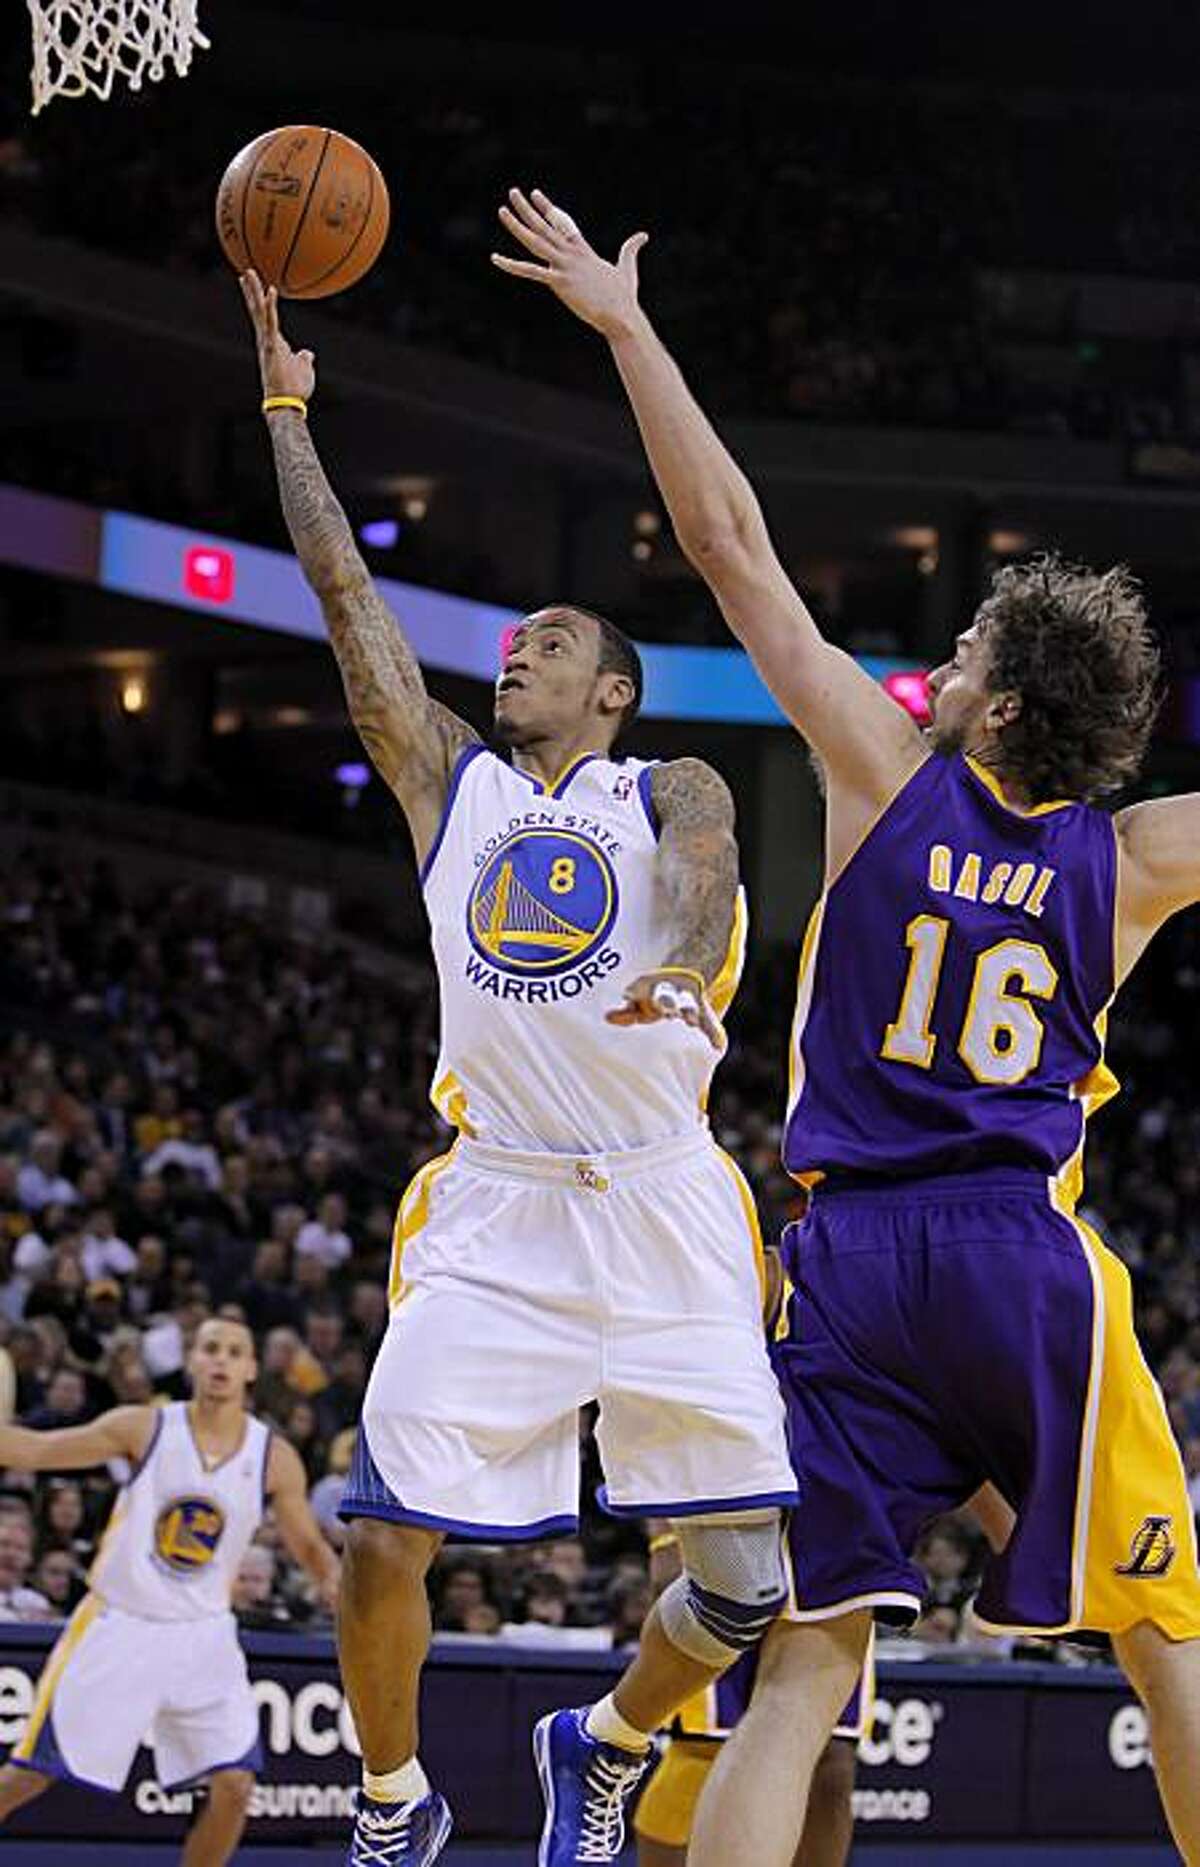 Monta Ellis puts up a shot as Pau Gasol tries to defend in the first quarter. The Warriors played the Los Angeles Lakers at Oracle Arena in Oakland, Calif., on Wednesday, January 12, 2011